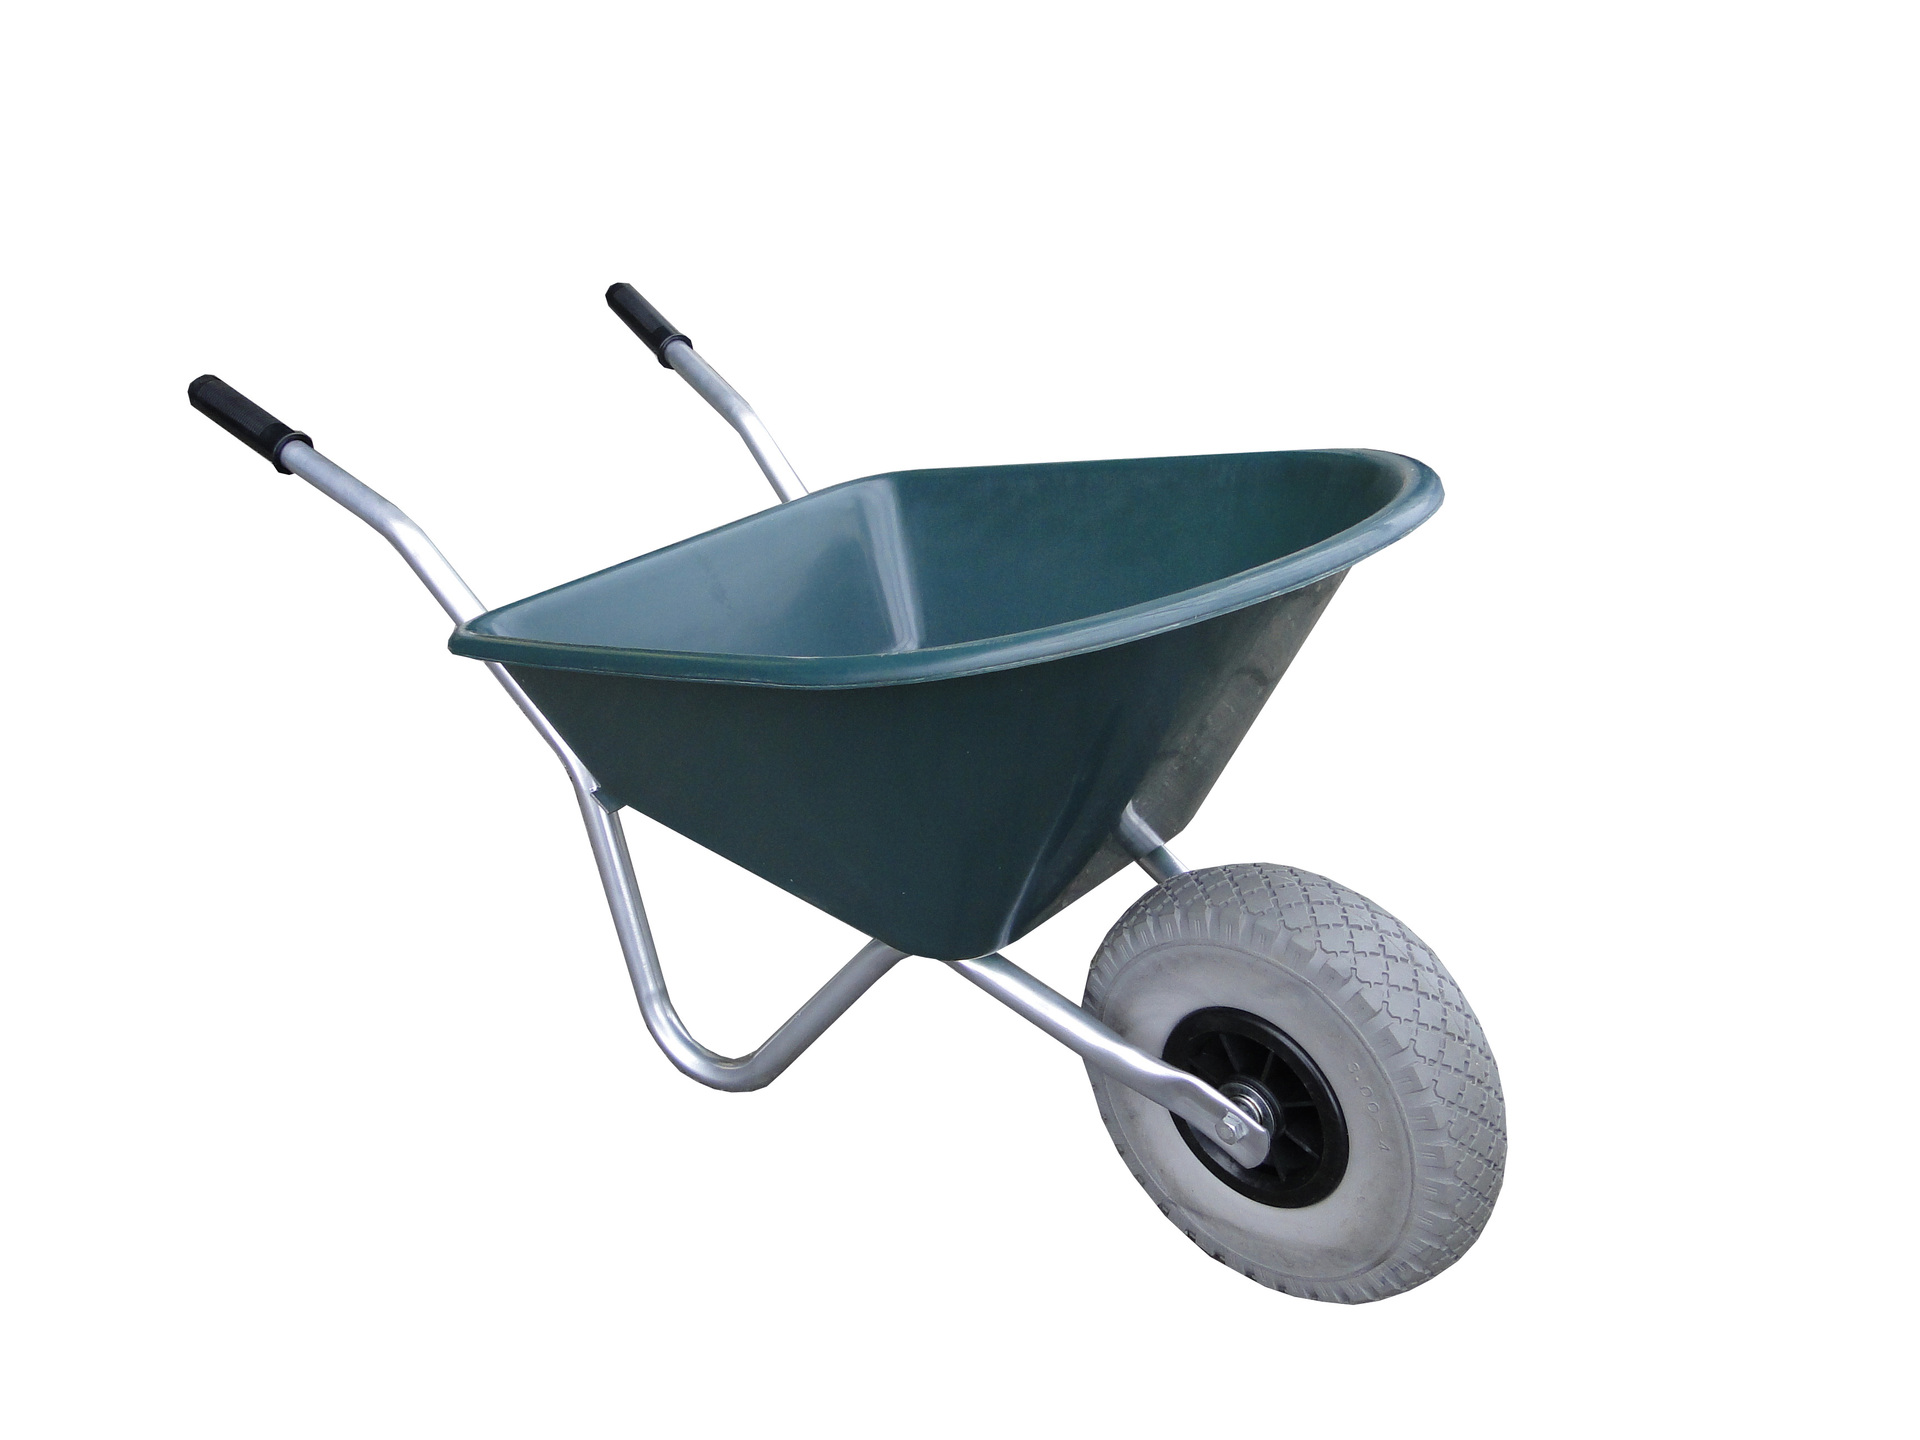 County Junior Childrens Wheelbarrow - Buy Toys from the Adventure Toys ...